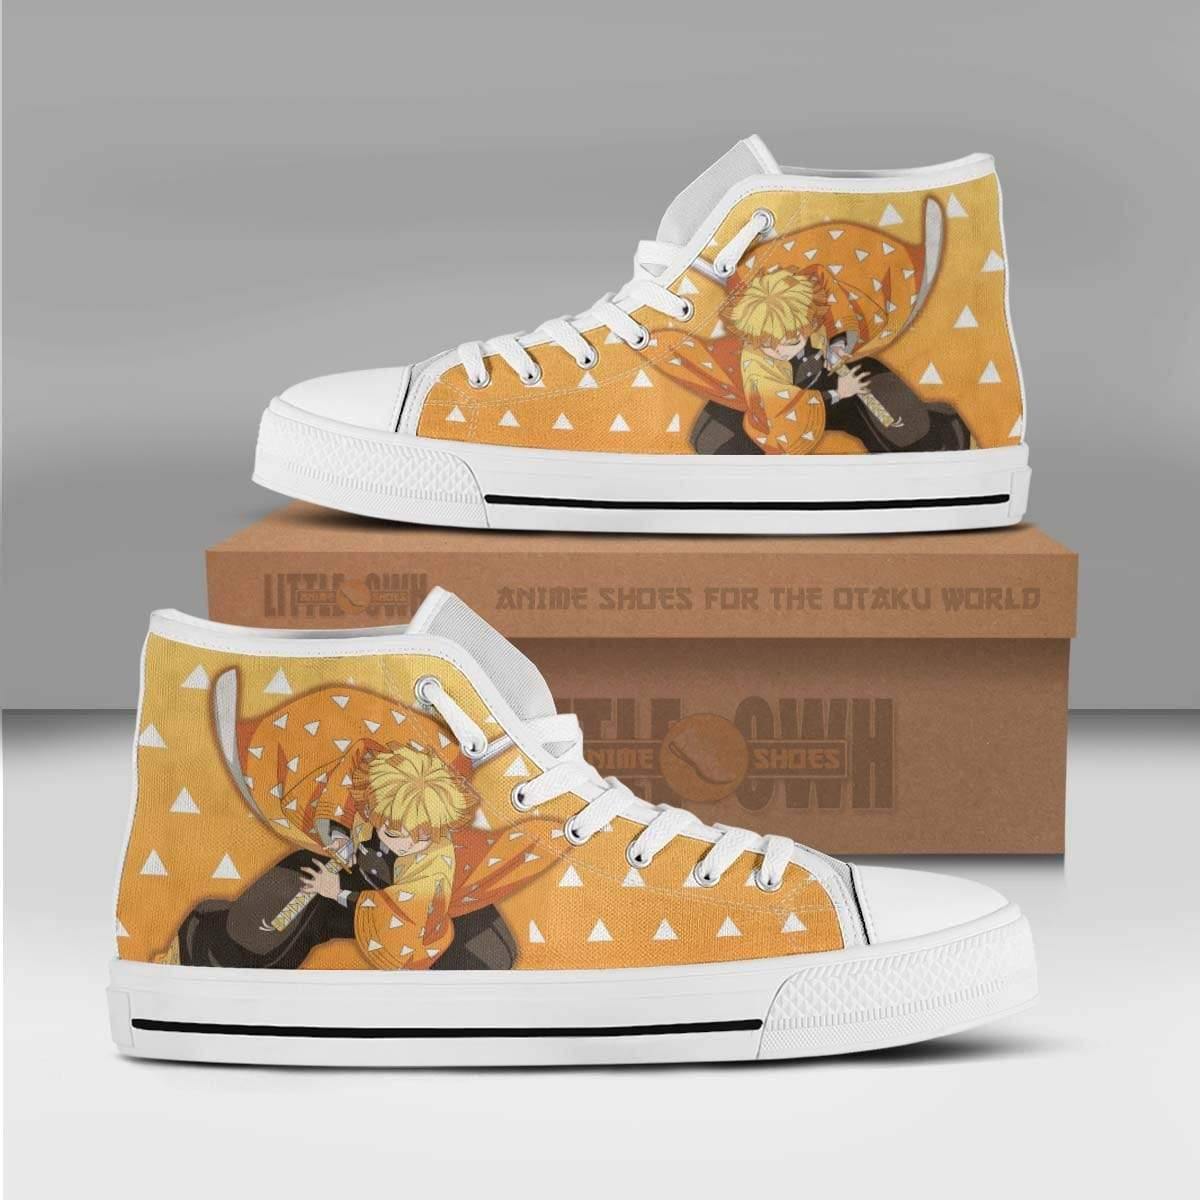 Zenitsu Demon Slayer Anime Custom All Star High Top Sneakers Pattern Canvas Shoes